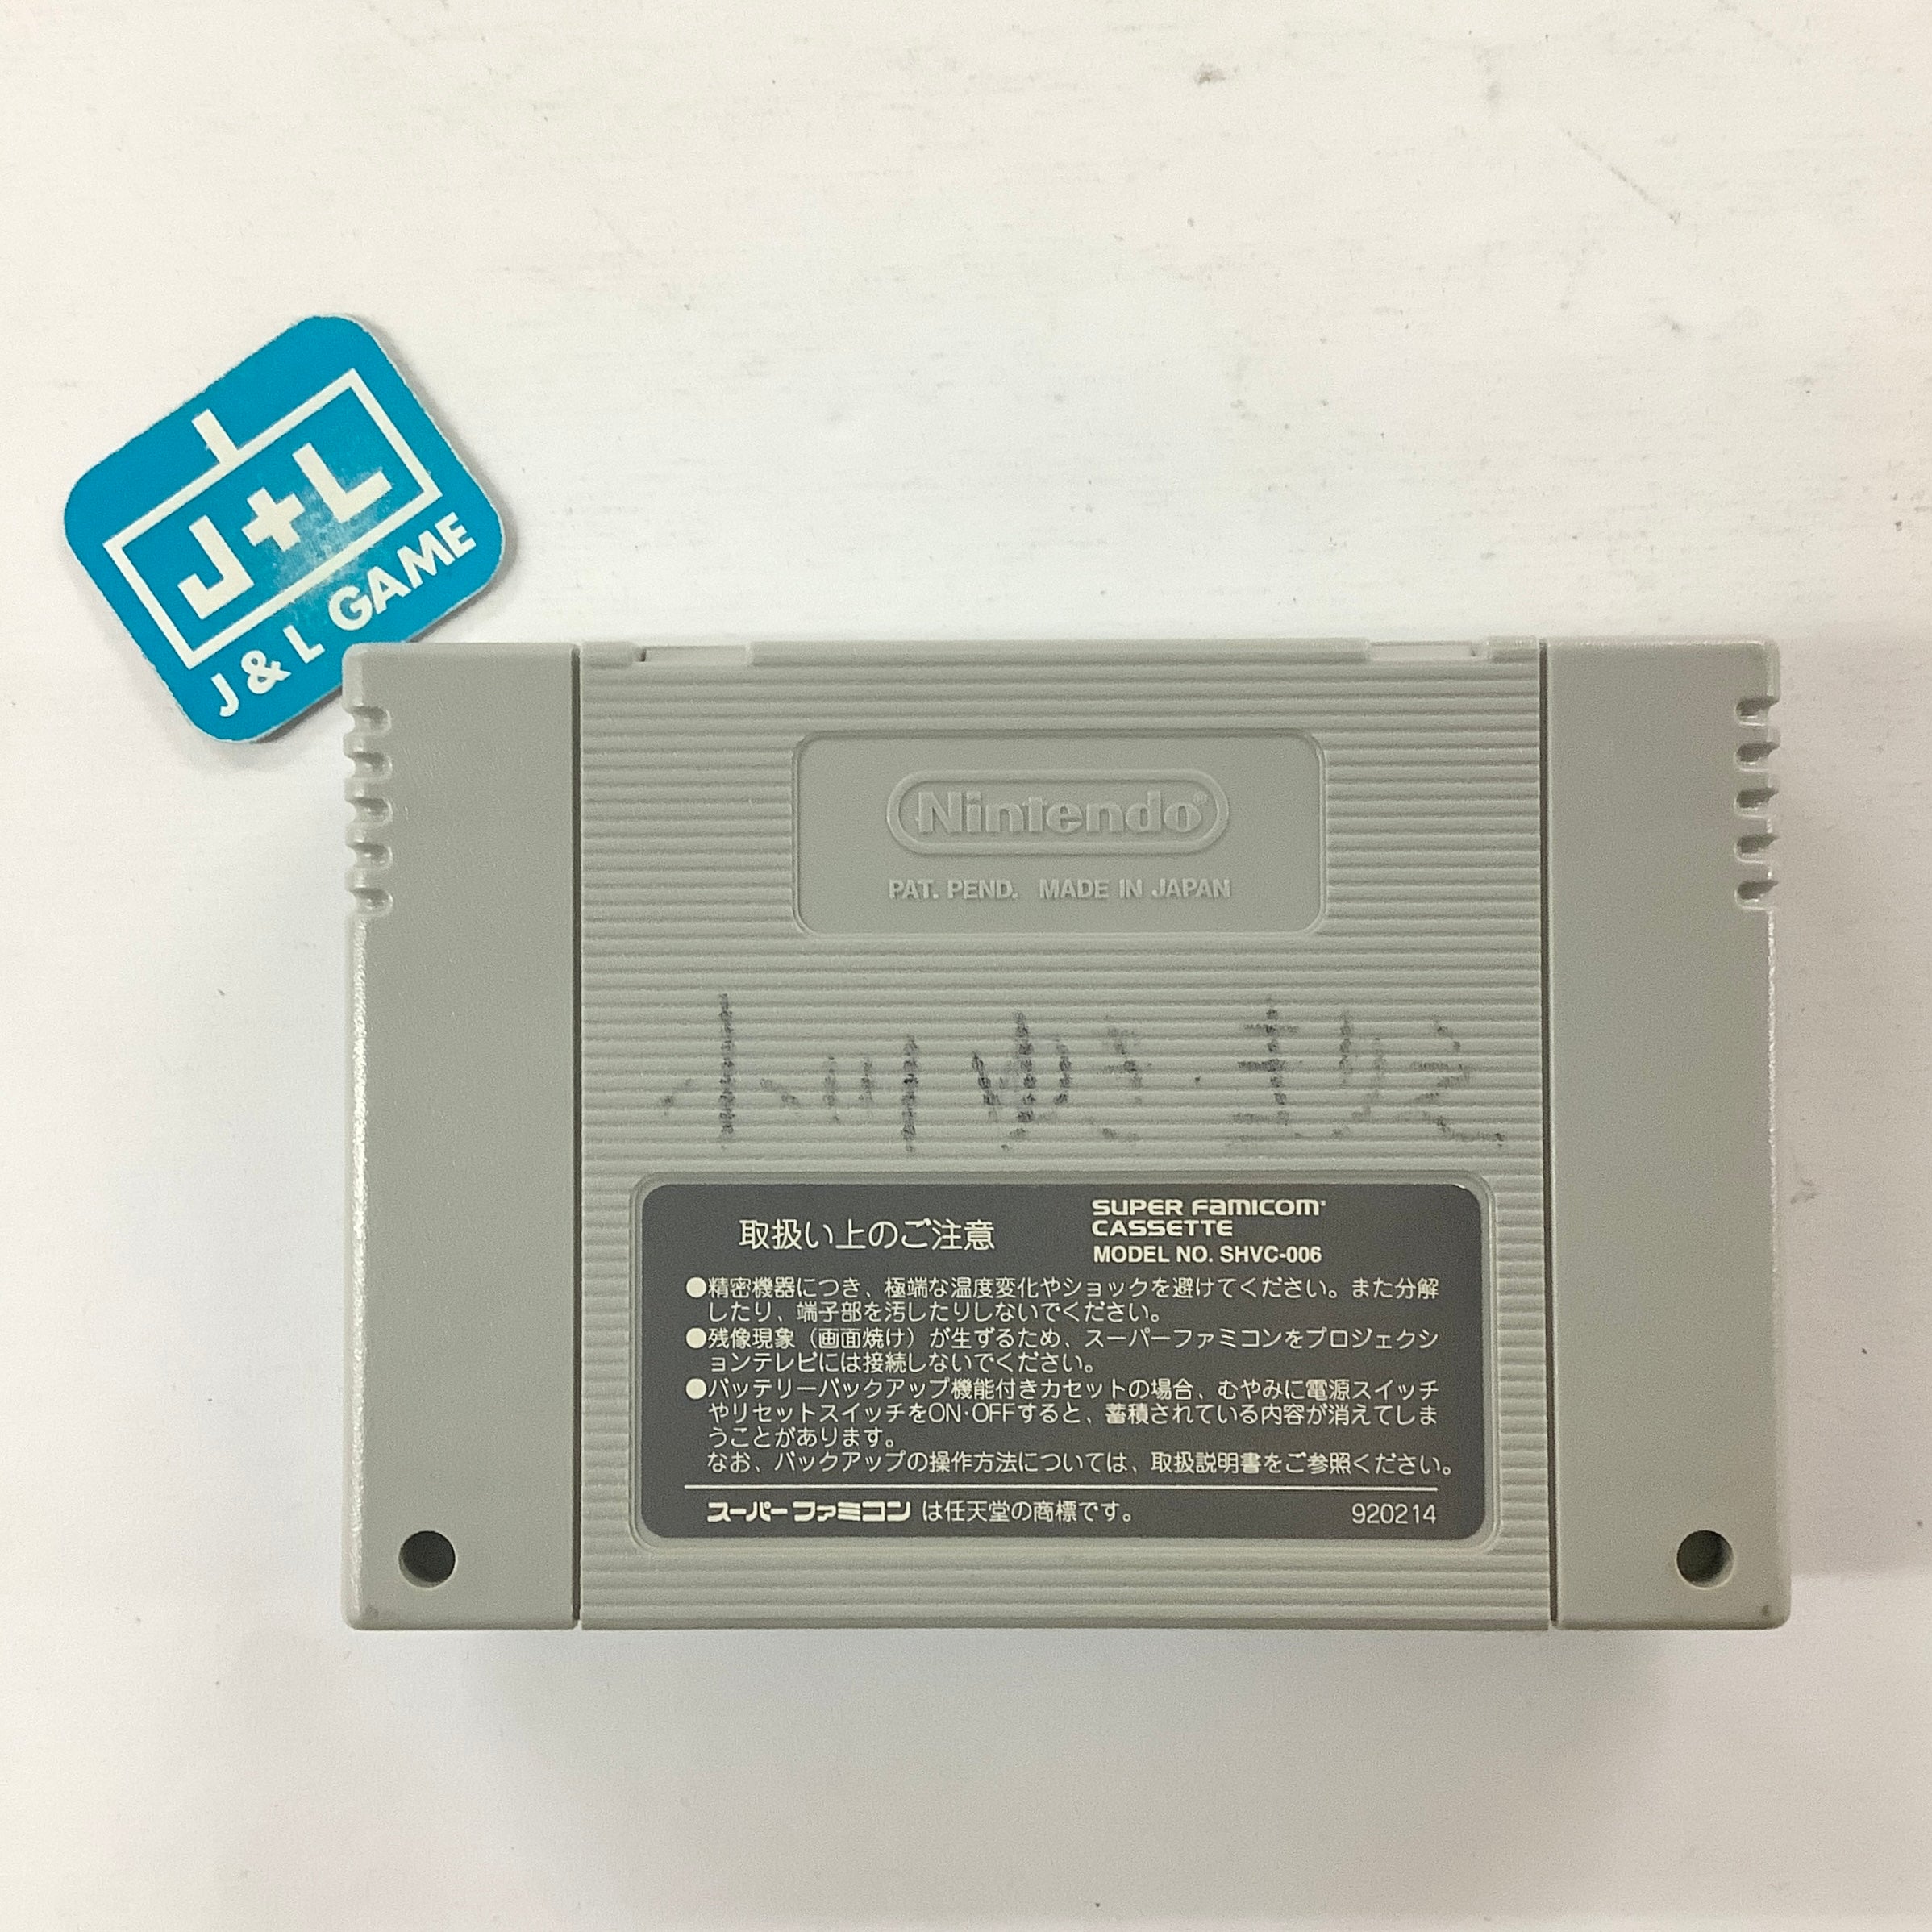 Snoopy Concert - (SFC) Super Famicom [Pre-Owned] (Japanese Import) Video Games Mitsui Fudosan   